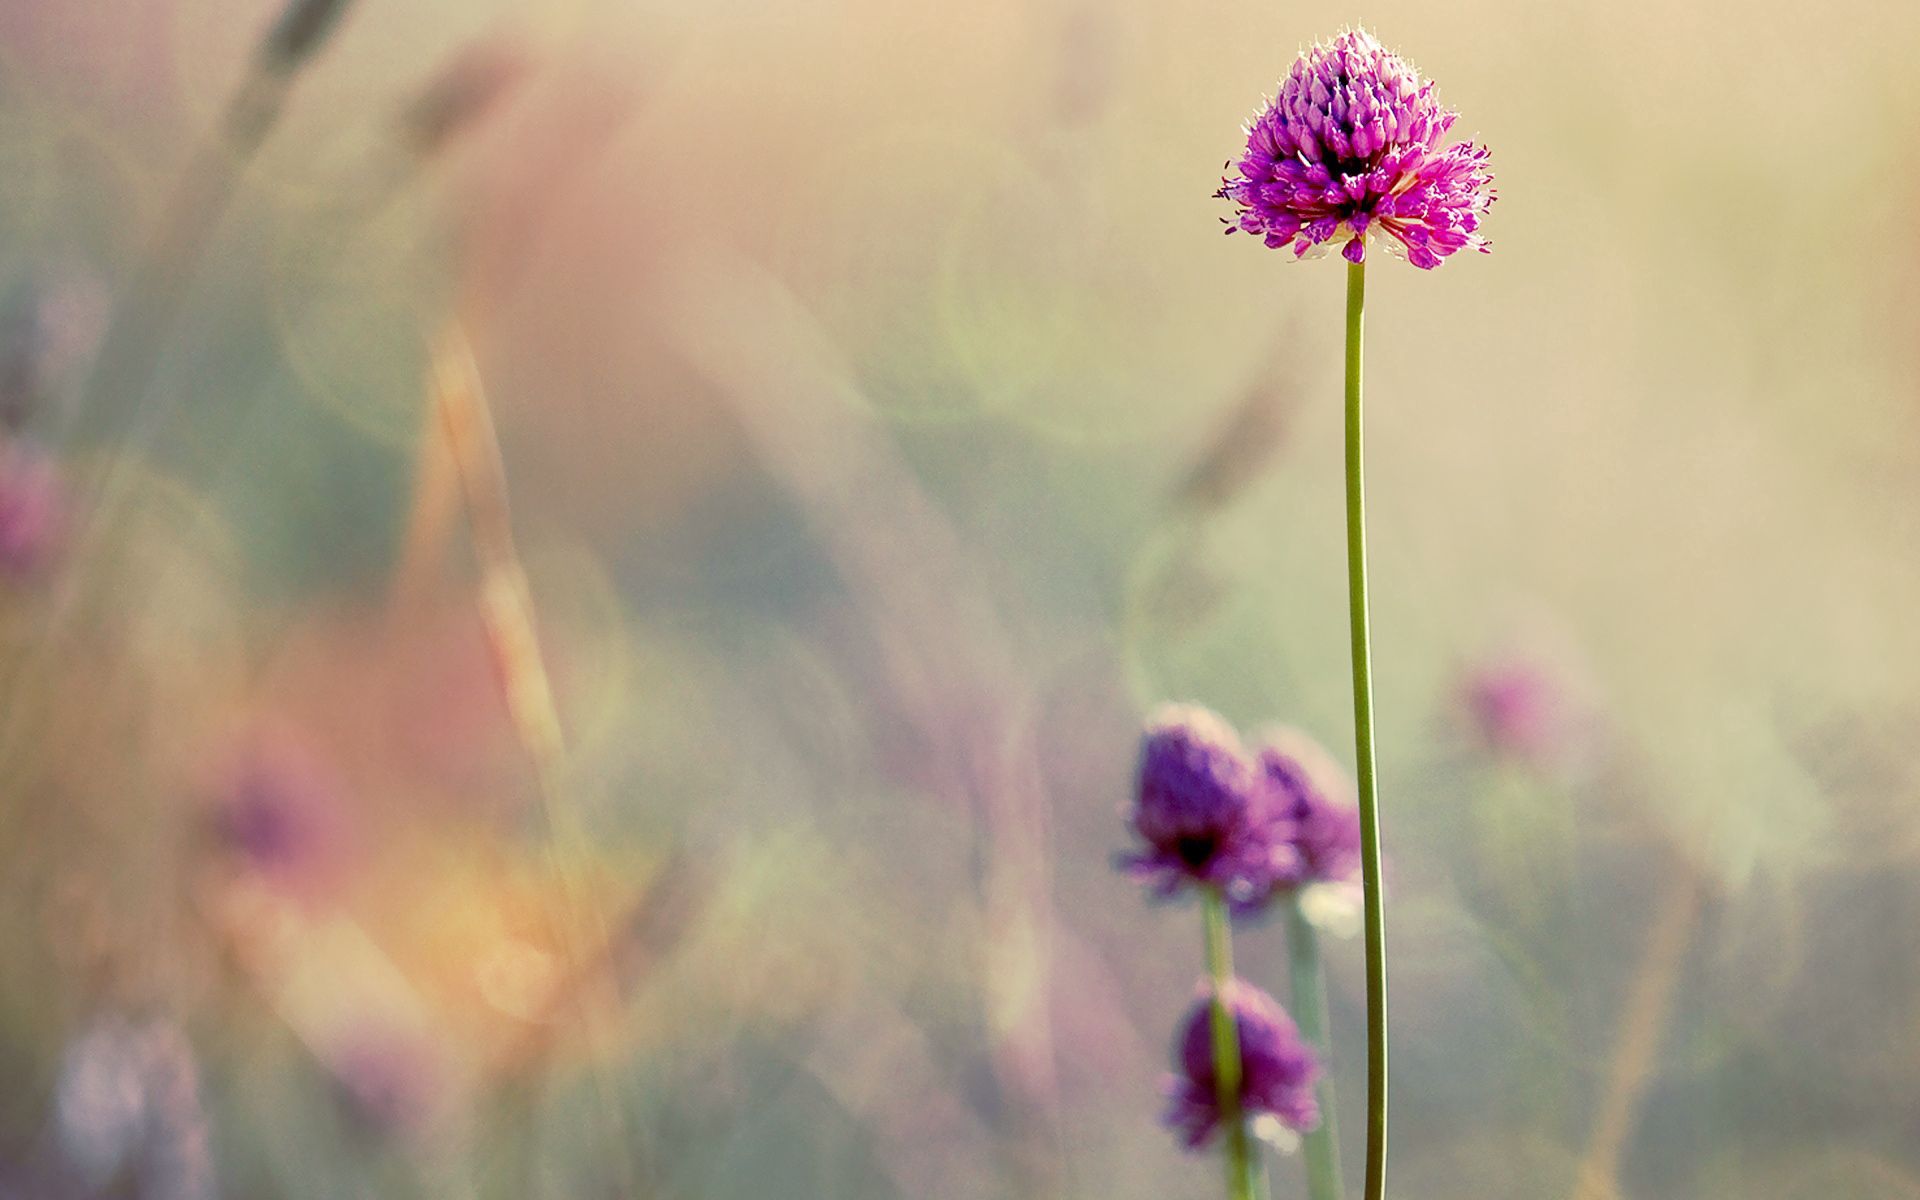 104024 download wallpaper flowers, blur, smooth, field, clover, stem, stalk screensavers and pictures for free